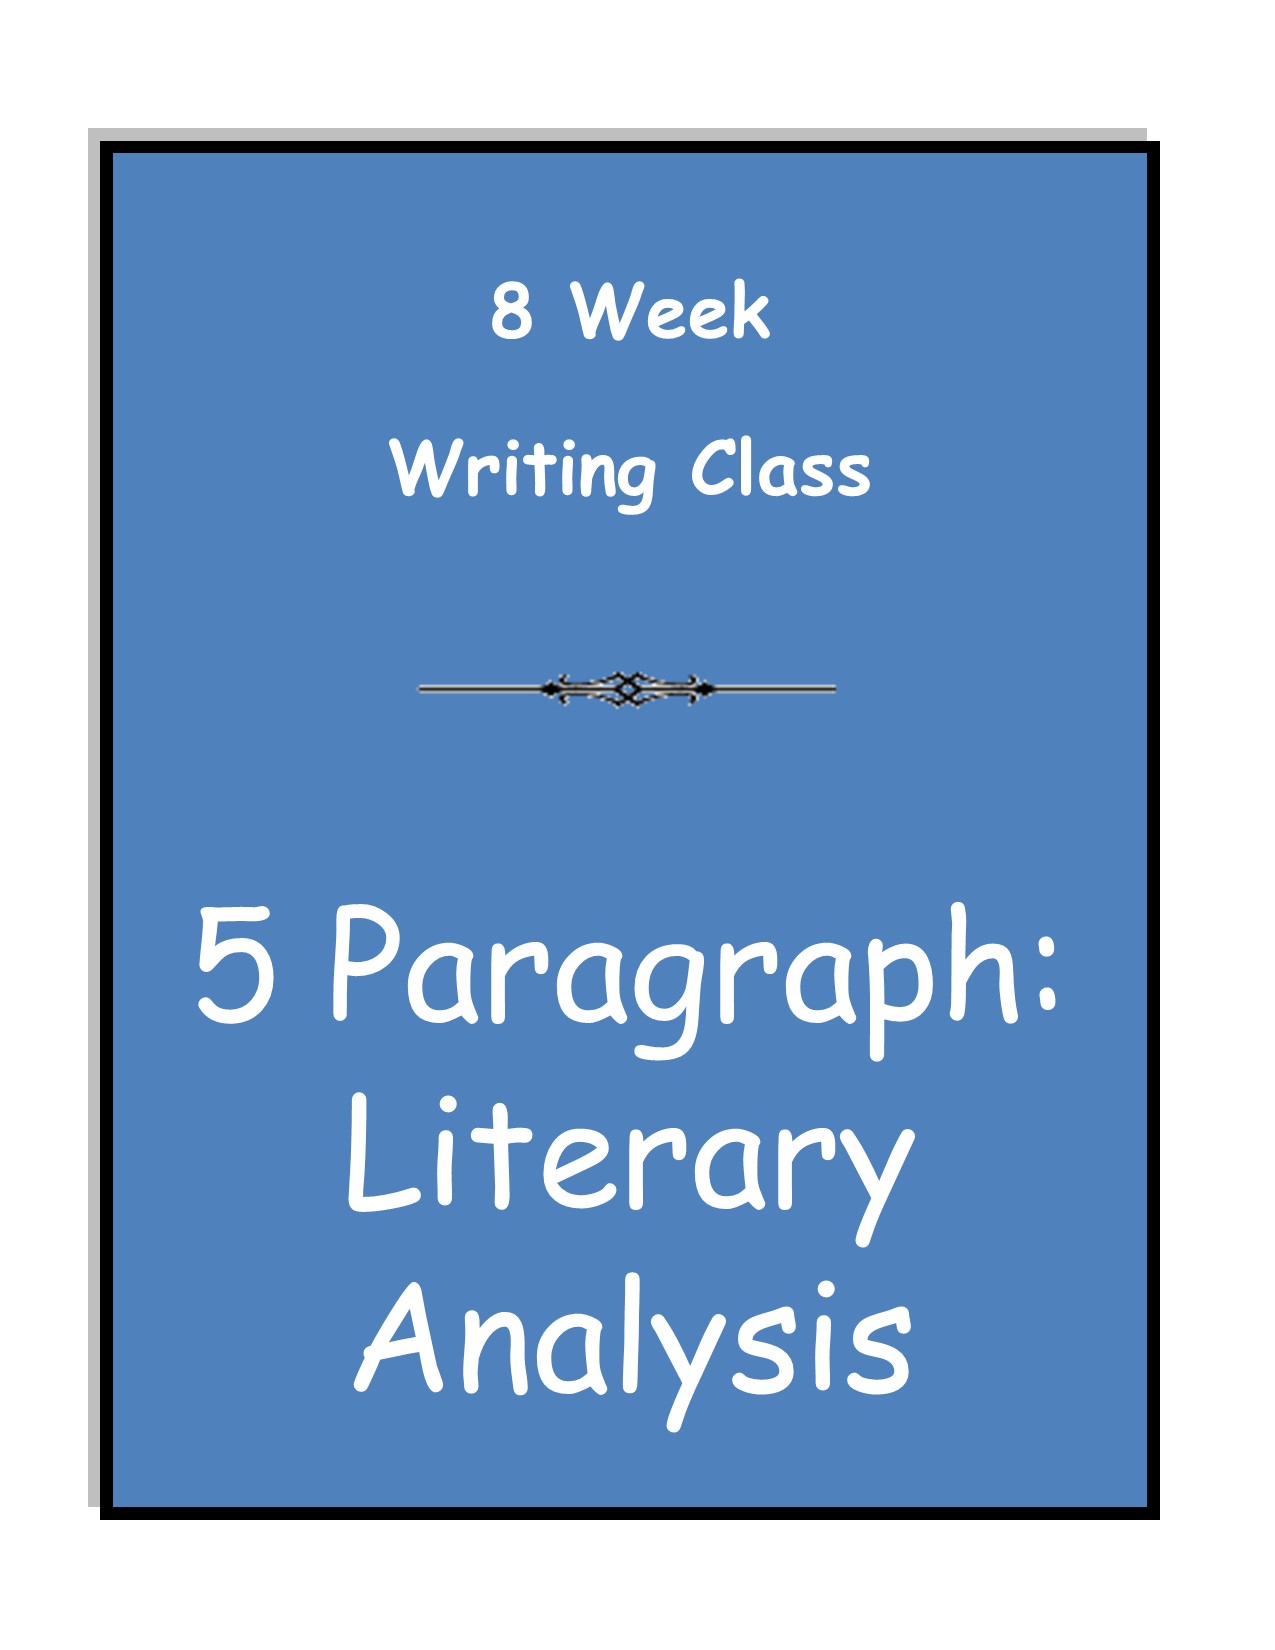 5 Paragraph Literary Analysis - Online Scribblers